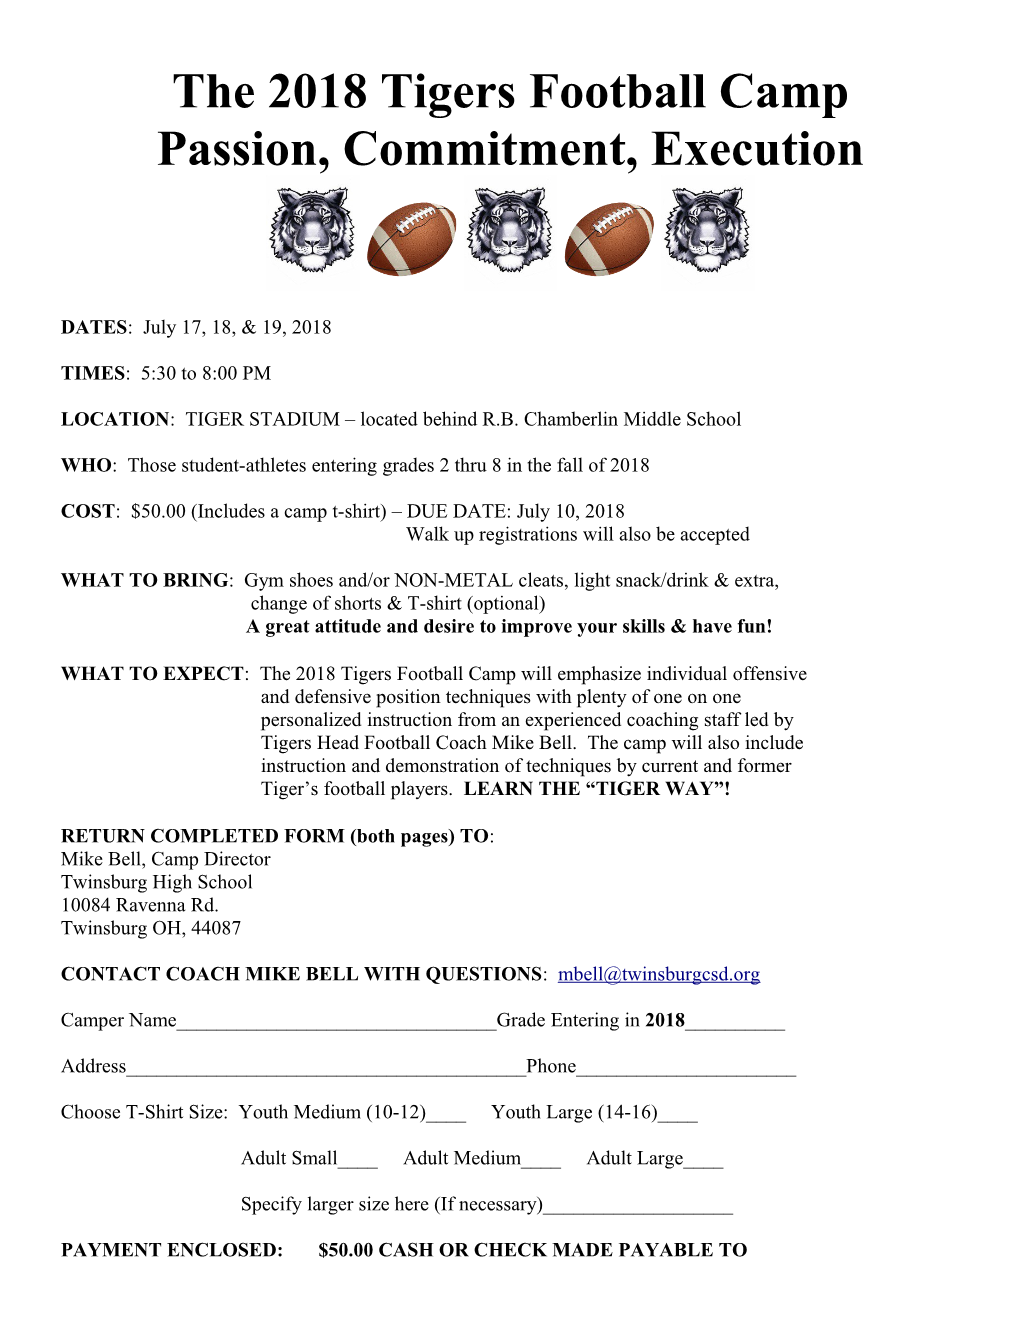 The 2018 Tigers Football Camp